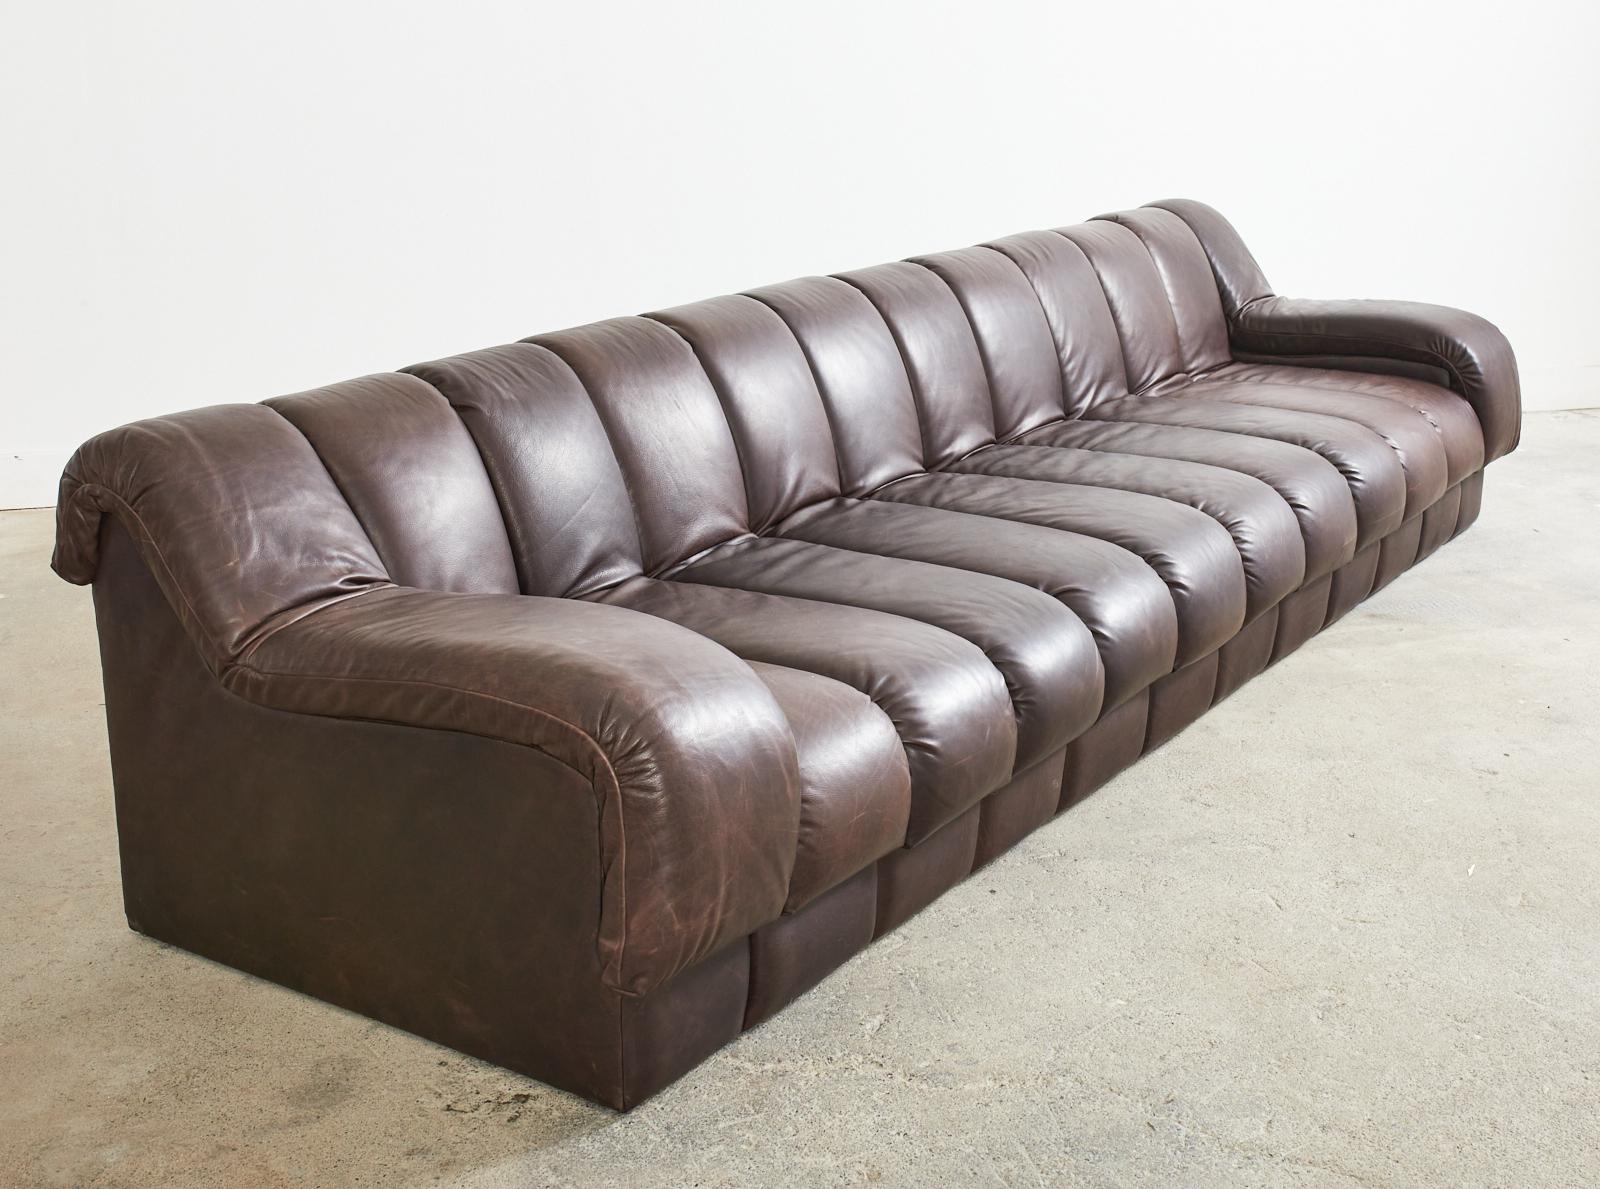 Bespoke monumental channeled leather sofa made in the manner and style of Steve Chase for Martin/Brattrud. Grand sofa known as the Monterey features a long hardwood frame covered with thick espresso leather in 12 wide channels, elements, or